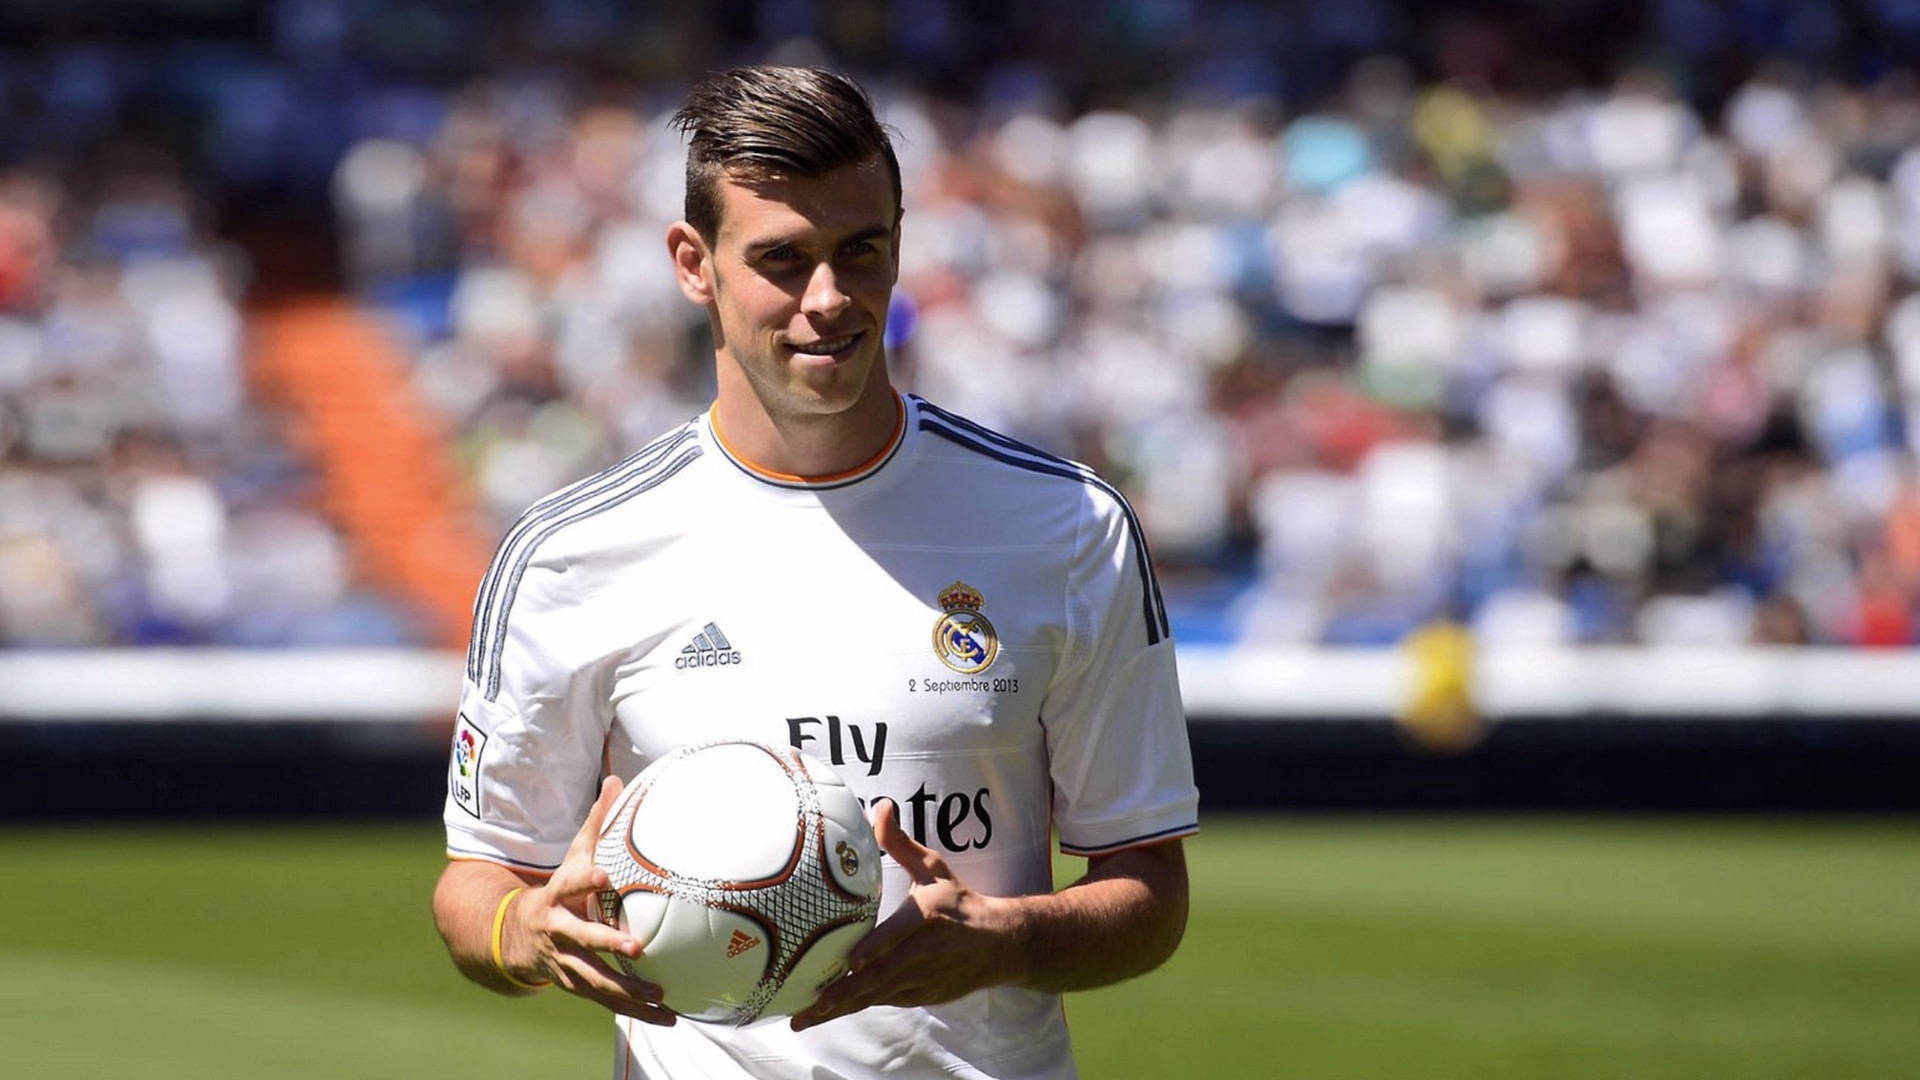 Gareth Bale With Ball Background